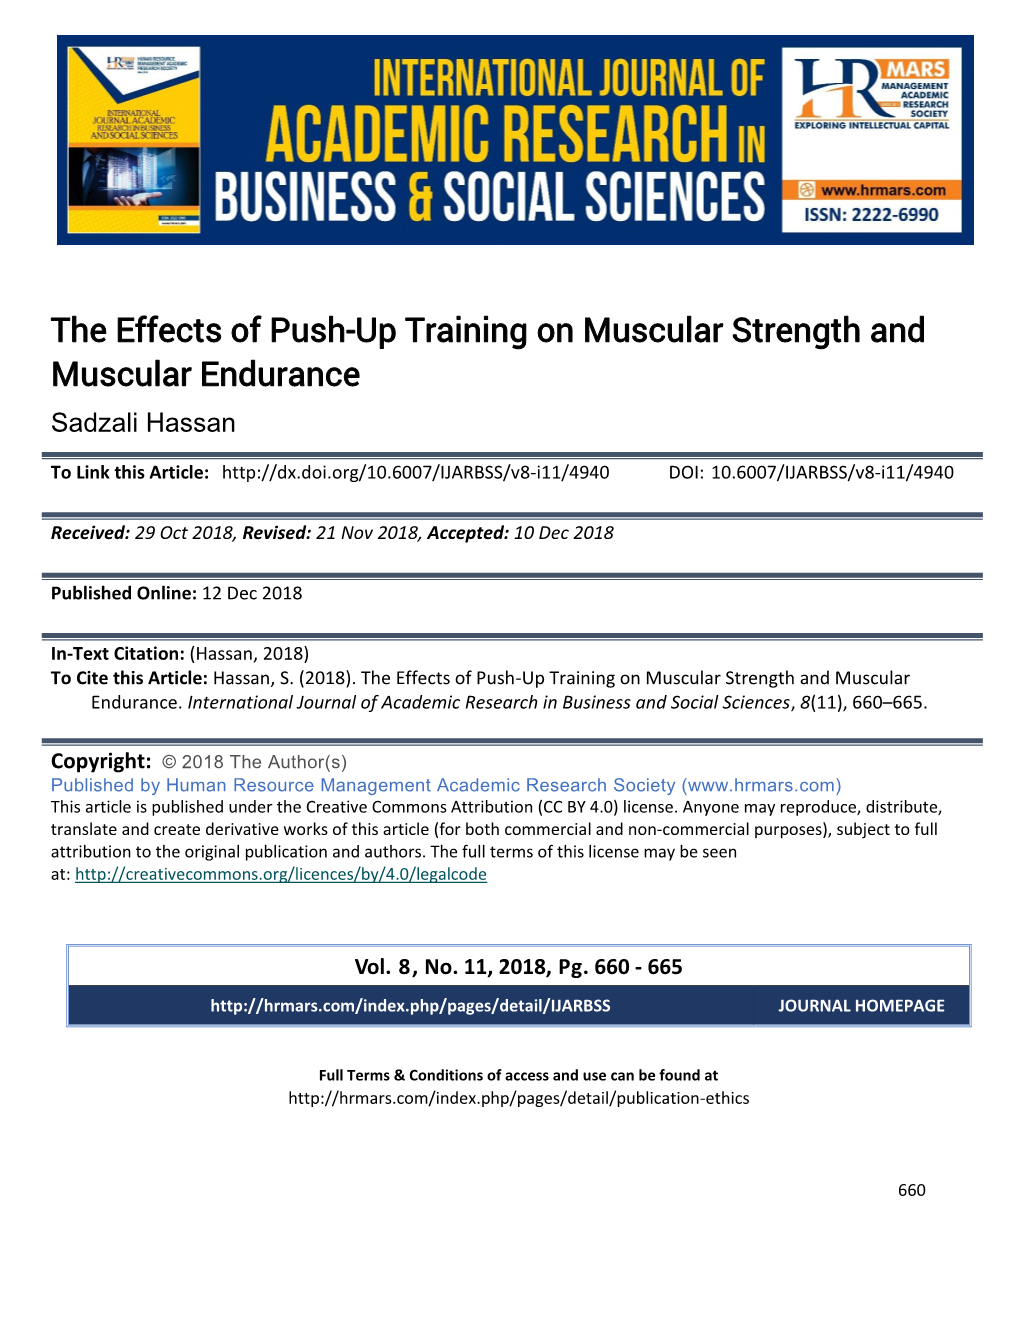 The Effects of Push-Up Training on Muscular Strength and Muscular Endurance